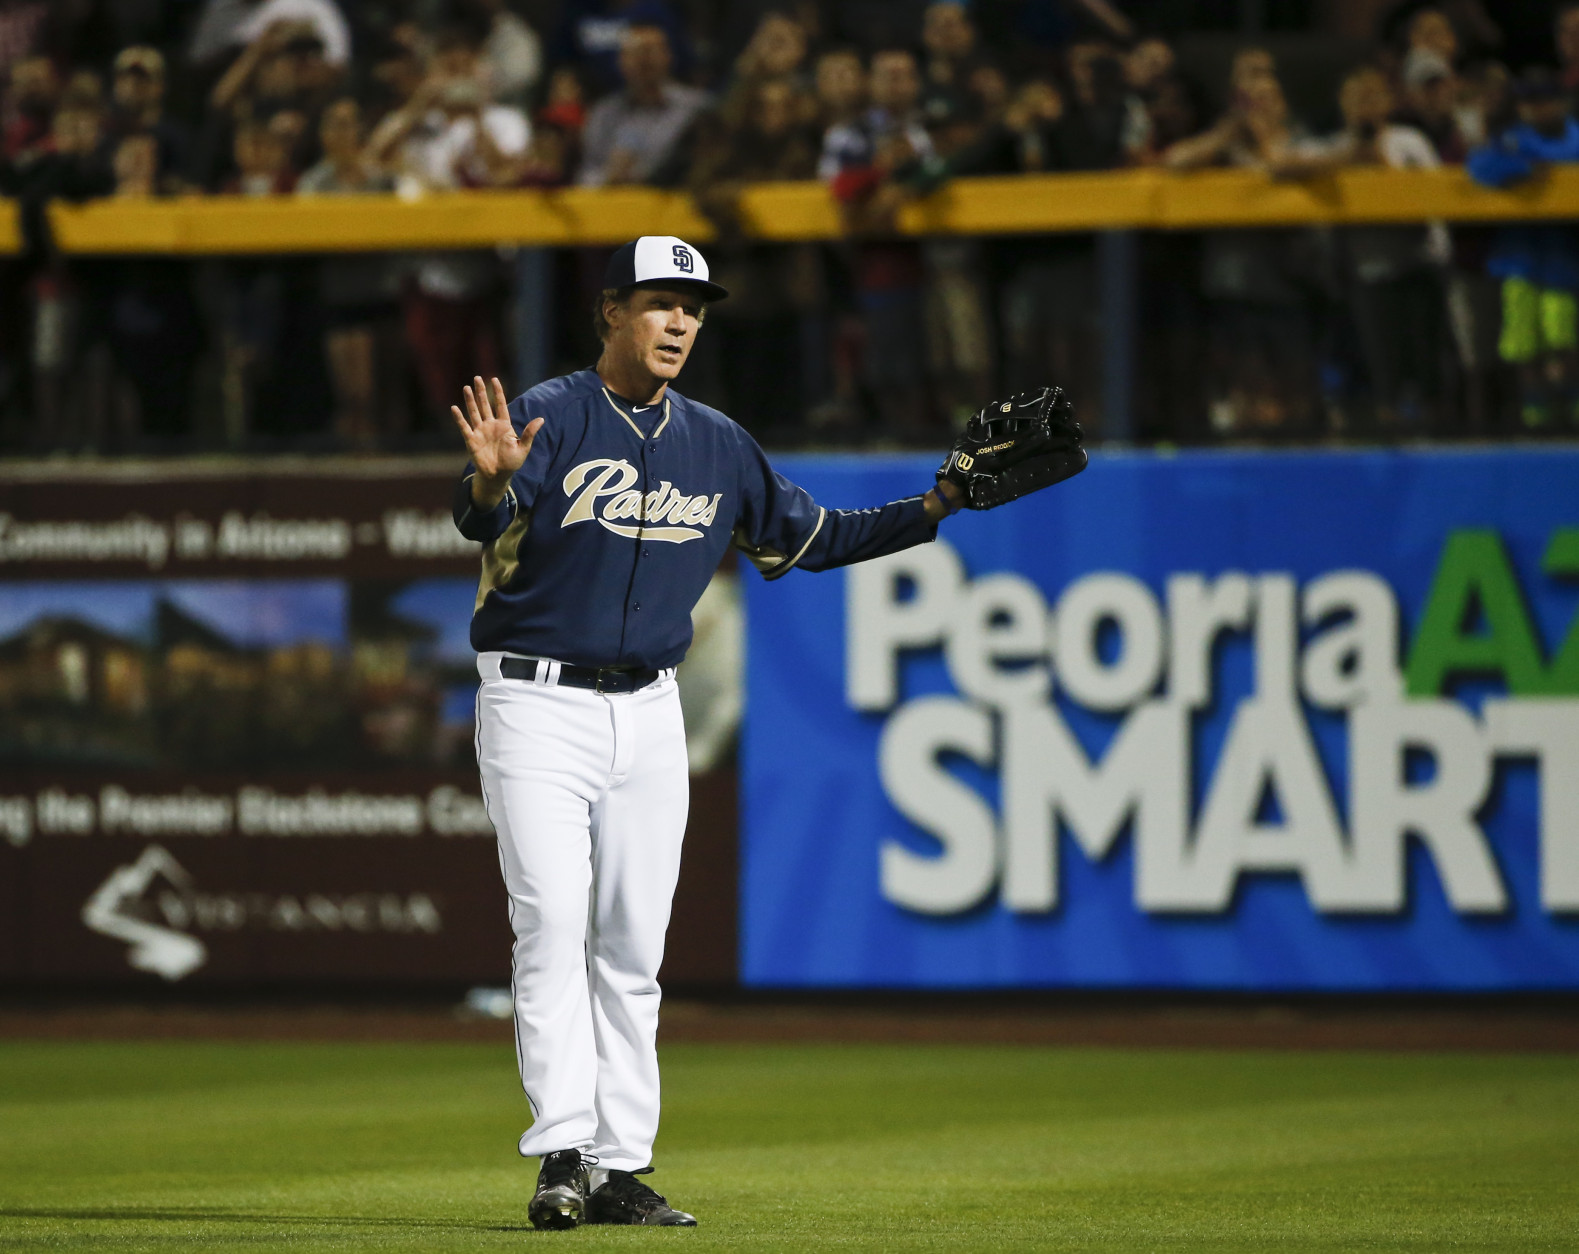 Actor Will Ferrell responds to the crowd's cheers while playing right field for the San Diego Padres during a spring training baseball game between the Padres and the Los Angeles Dodgers Thursday, March 12, 2015, in Peoria, Ariz.  (AP Photo/Lenny Ignelzi)